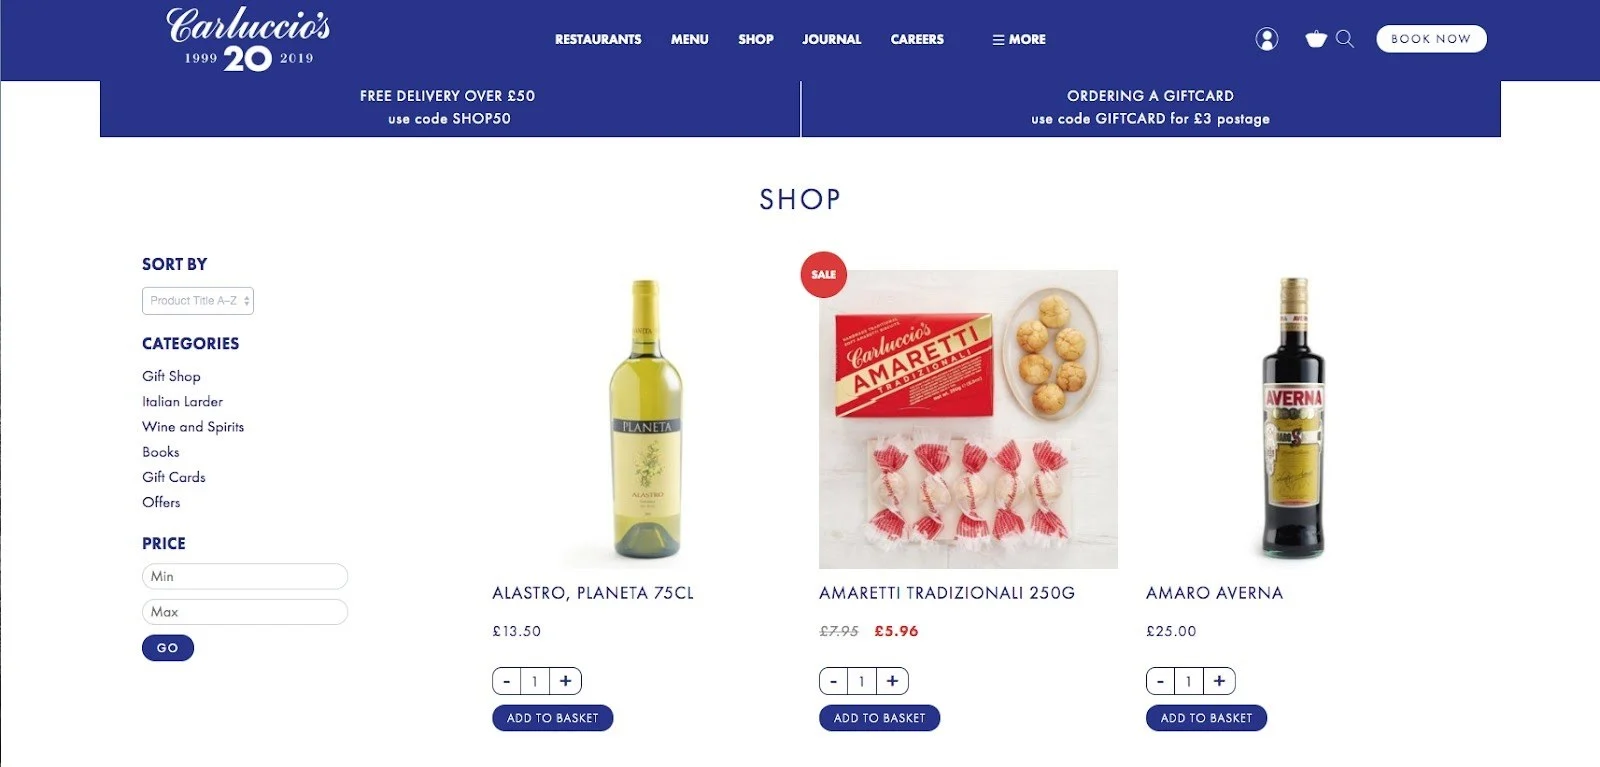 https://www-cdn.bigcommerce.com/assets/Carluccios-Microservices-ICP.jpeg